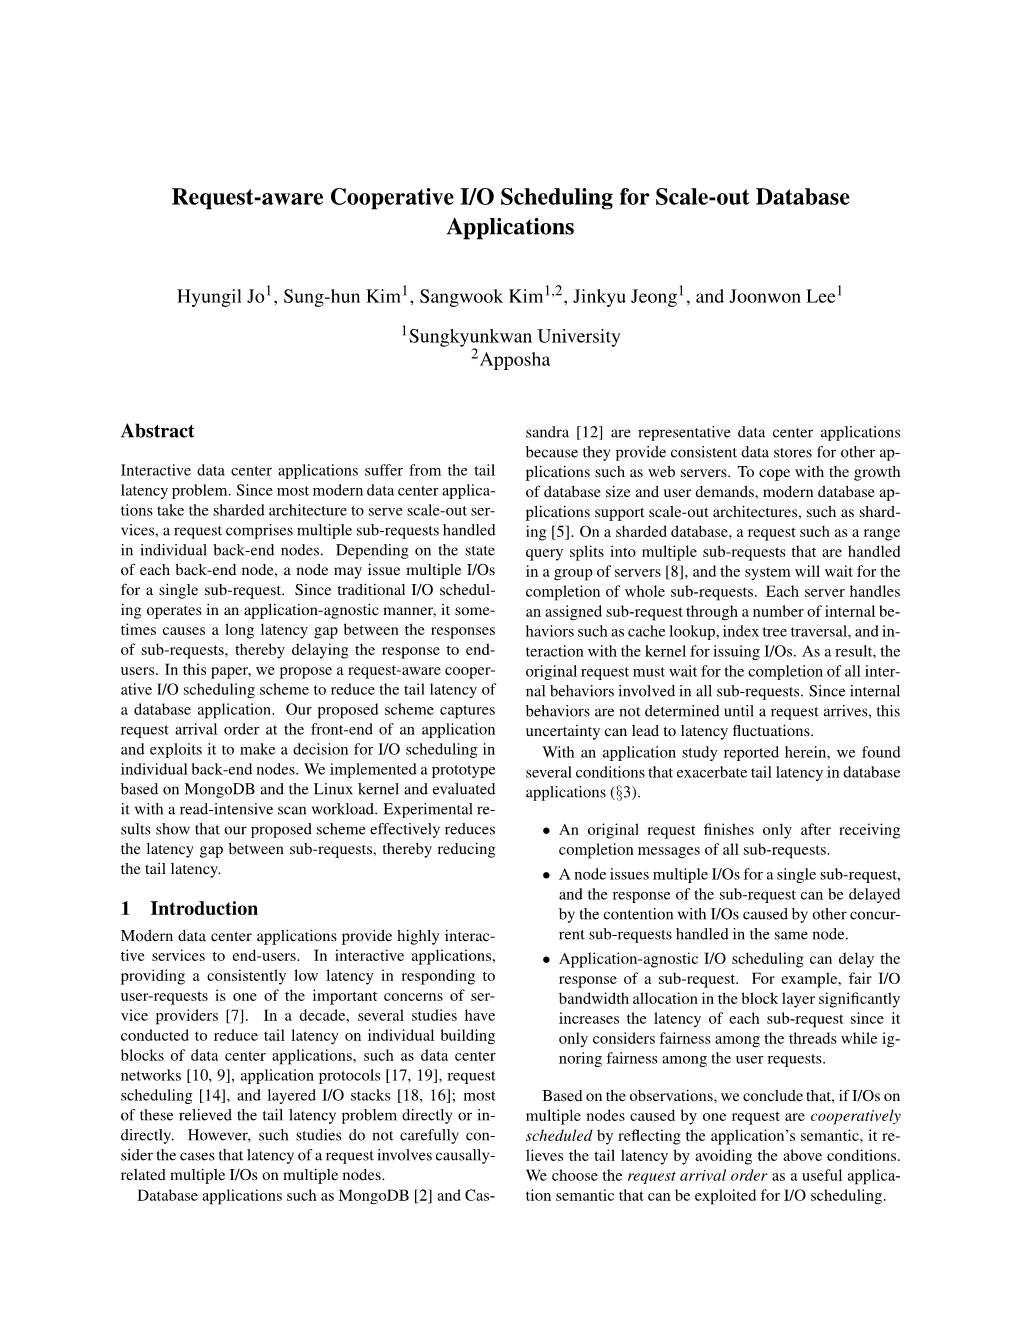 Request-Aware Cooperative I/O Scheduling for Scale-Out Database Applications